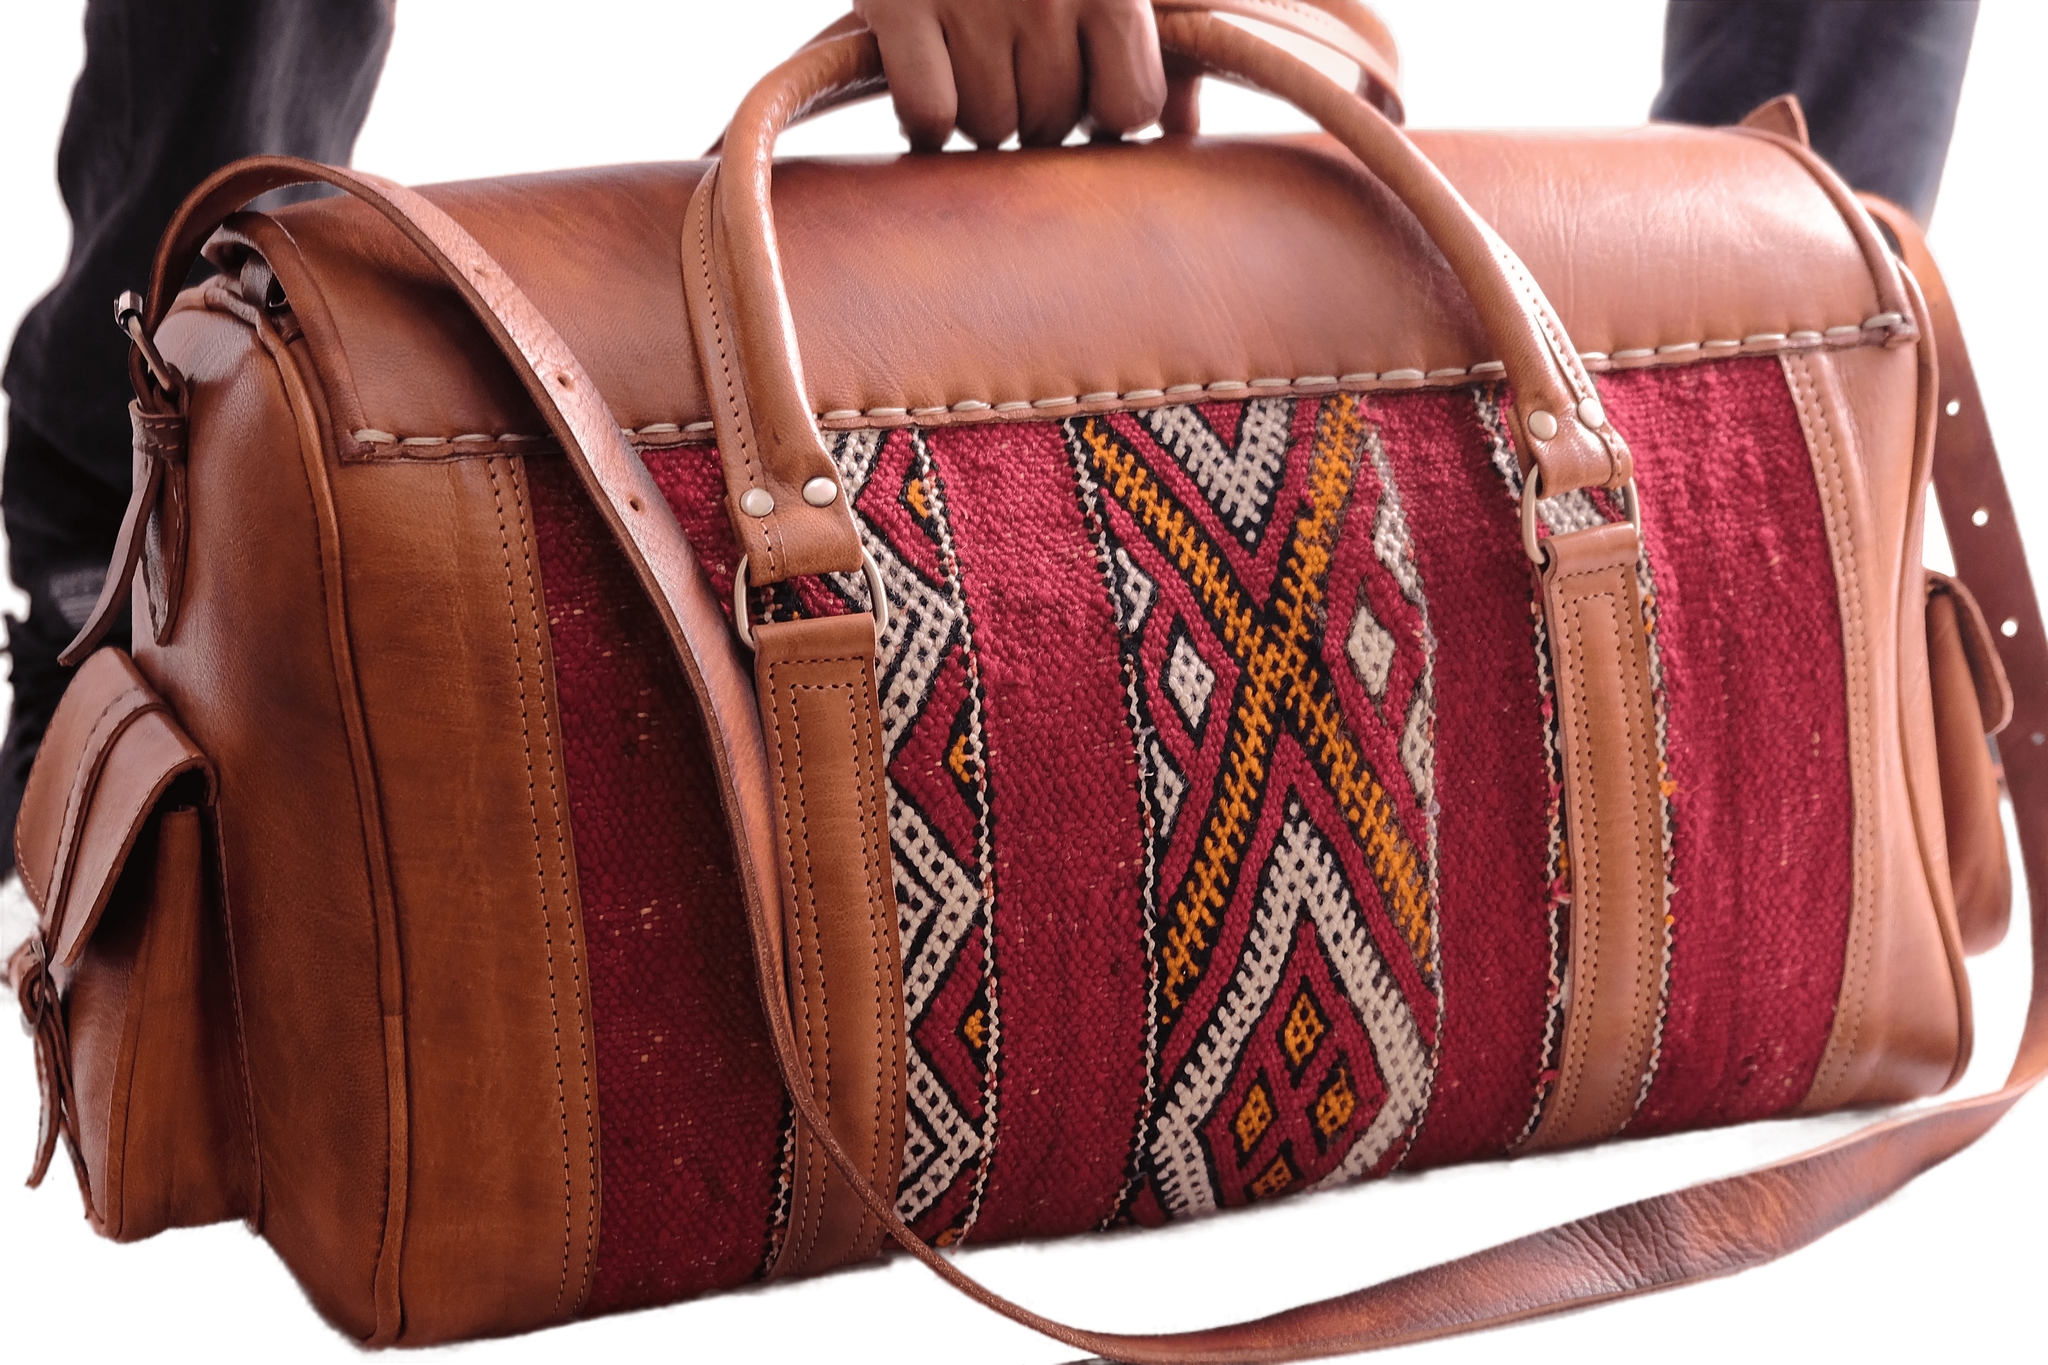 Are you on the hunt for the perfect leather bag? Look no further than Moroccan leather bags!